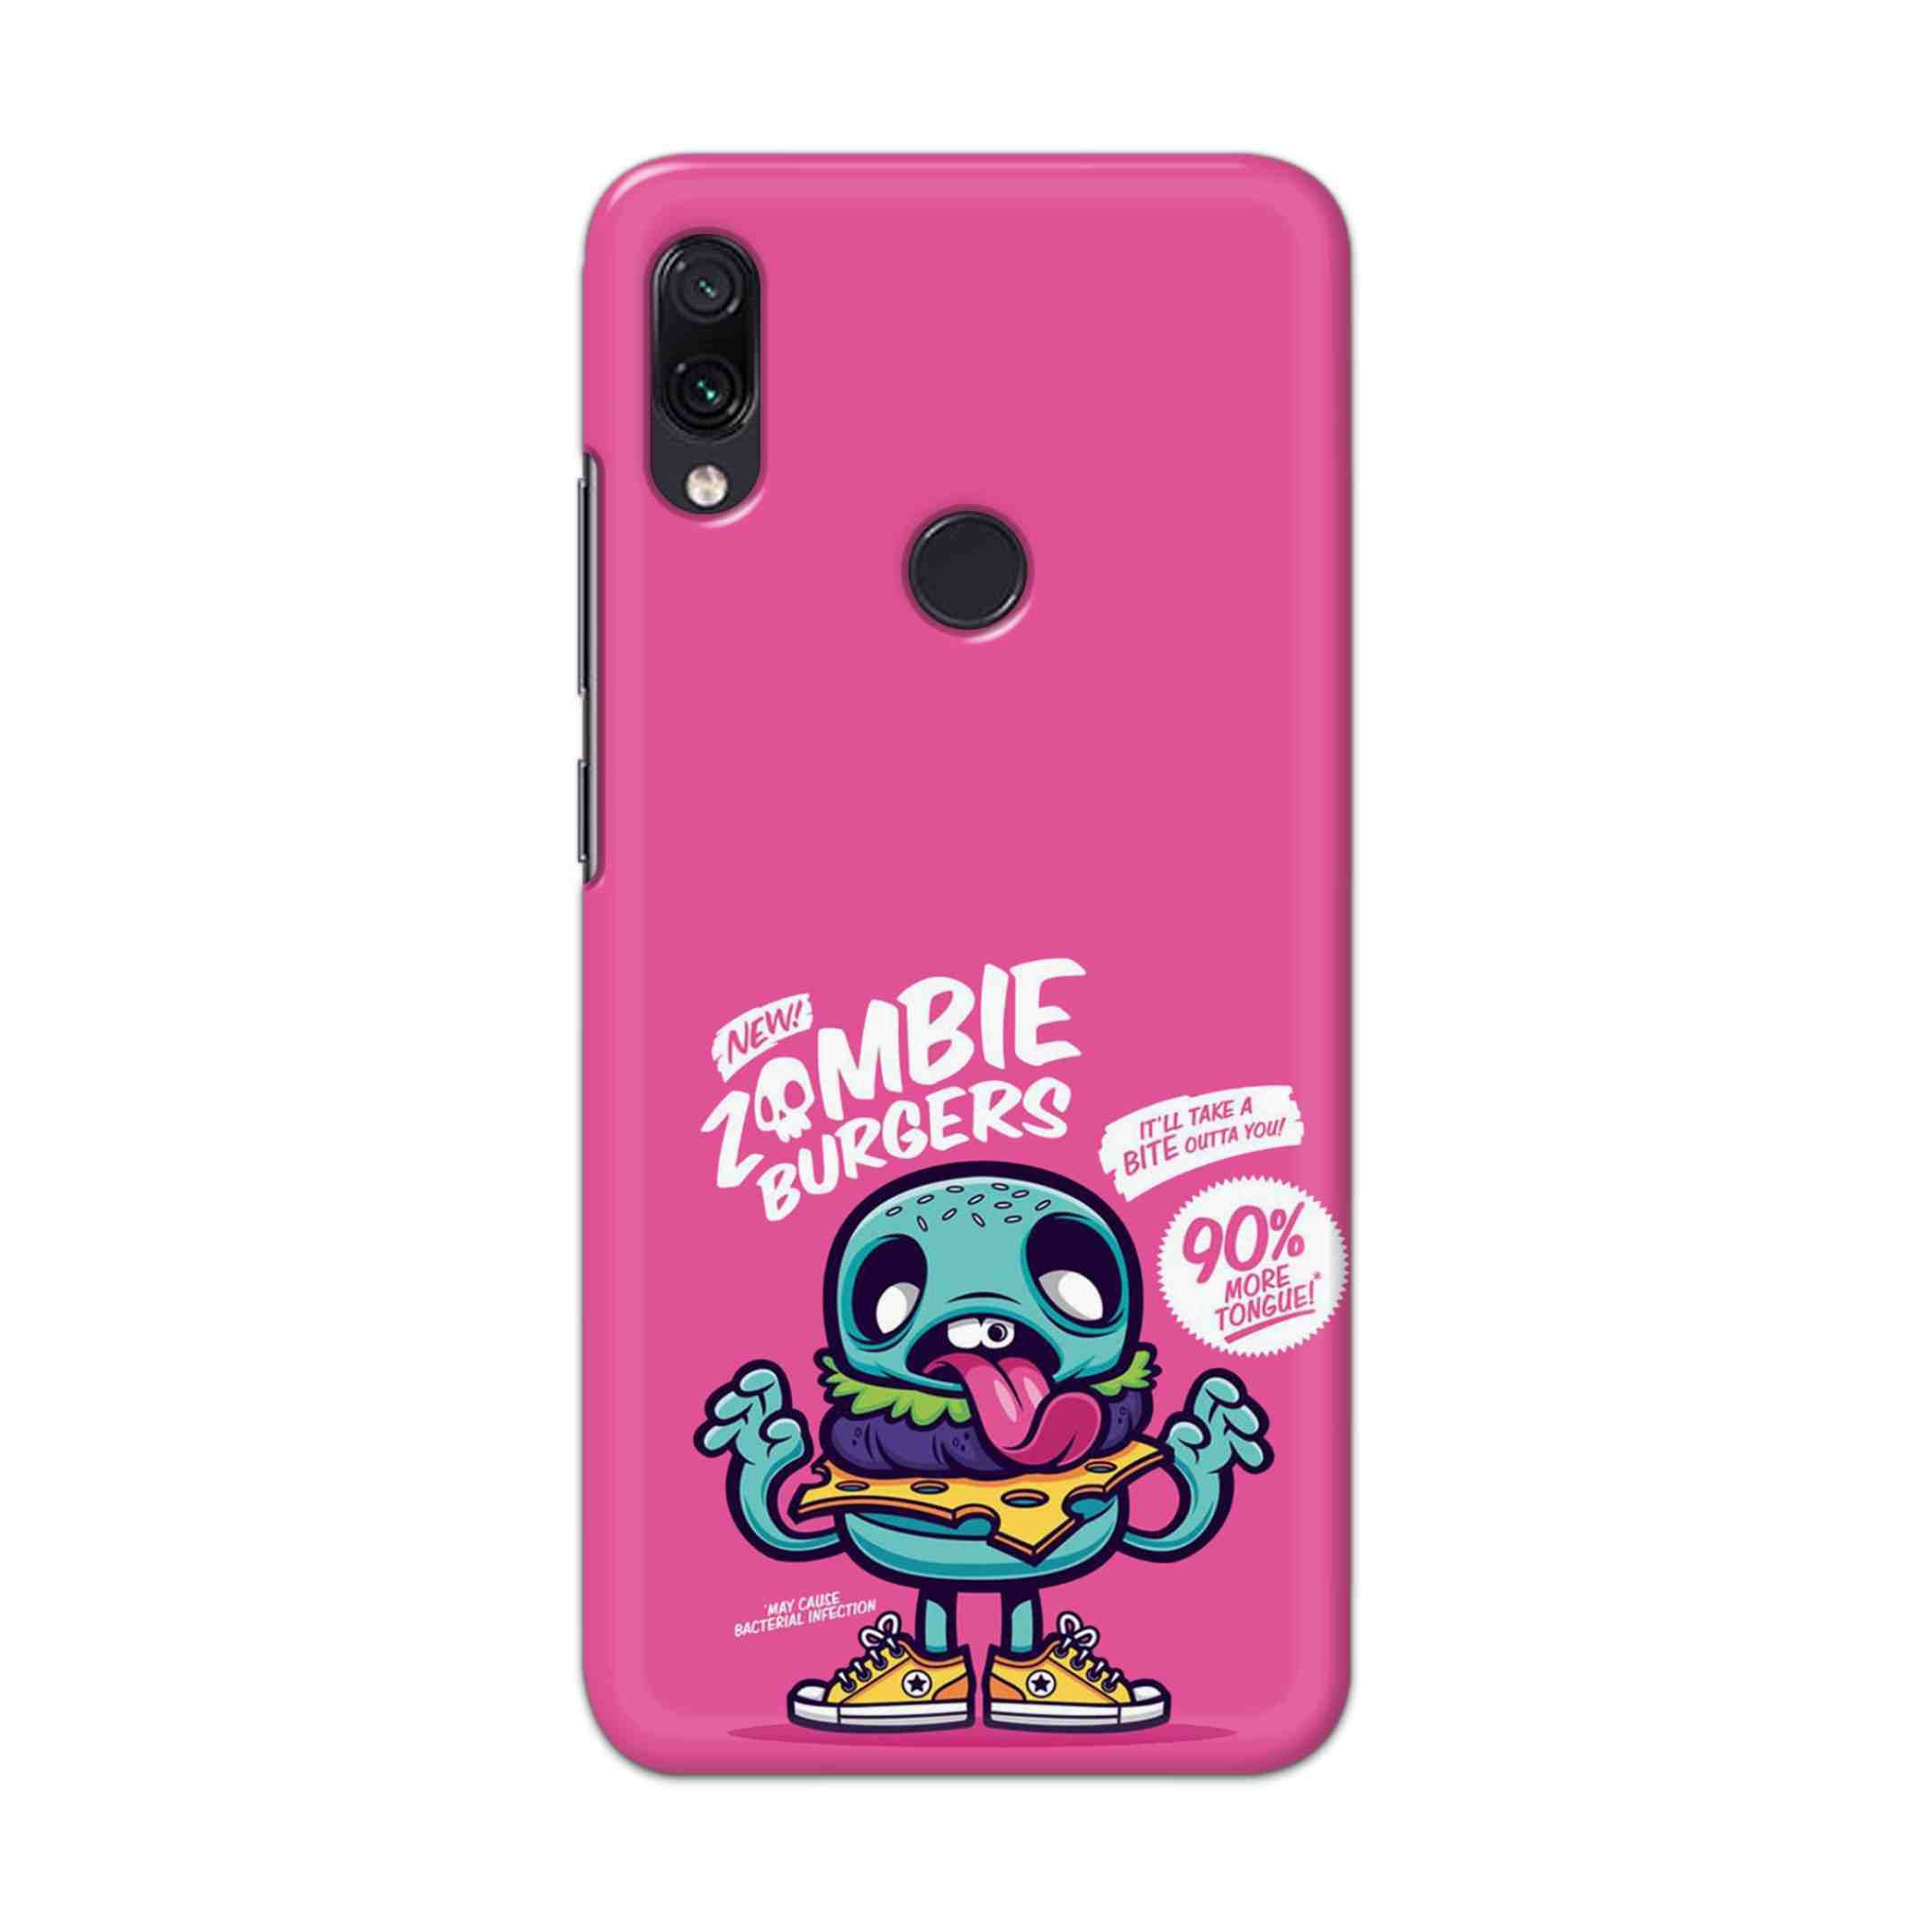 Buy New Zombie Burgers Hard Back Mobile Phone Case Cover For Xiaomi Redmi 7 Online